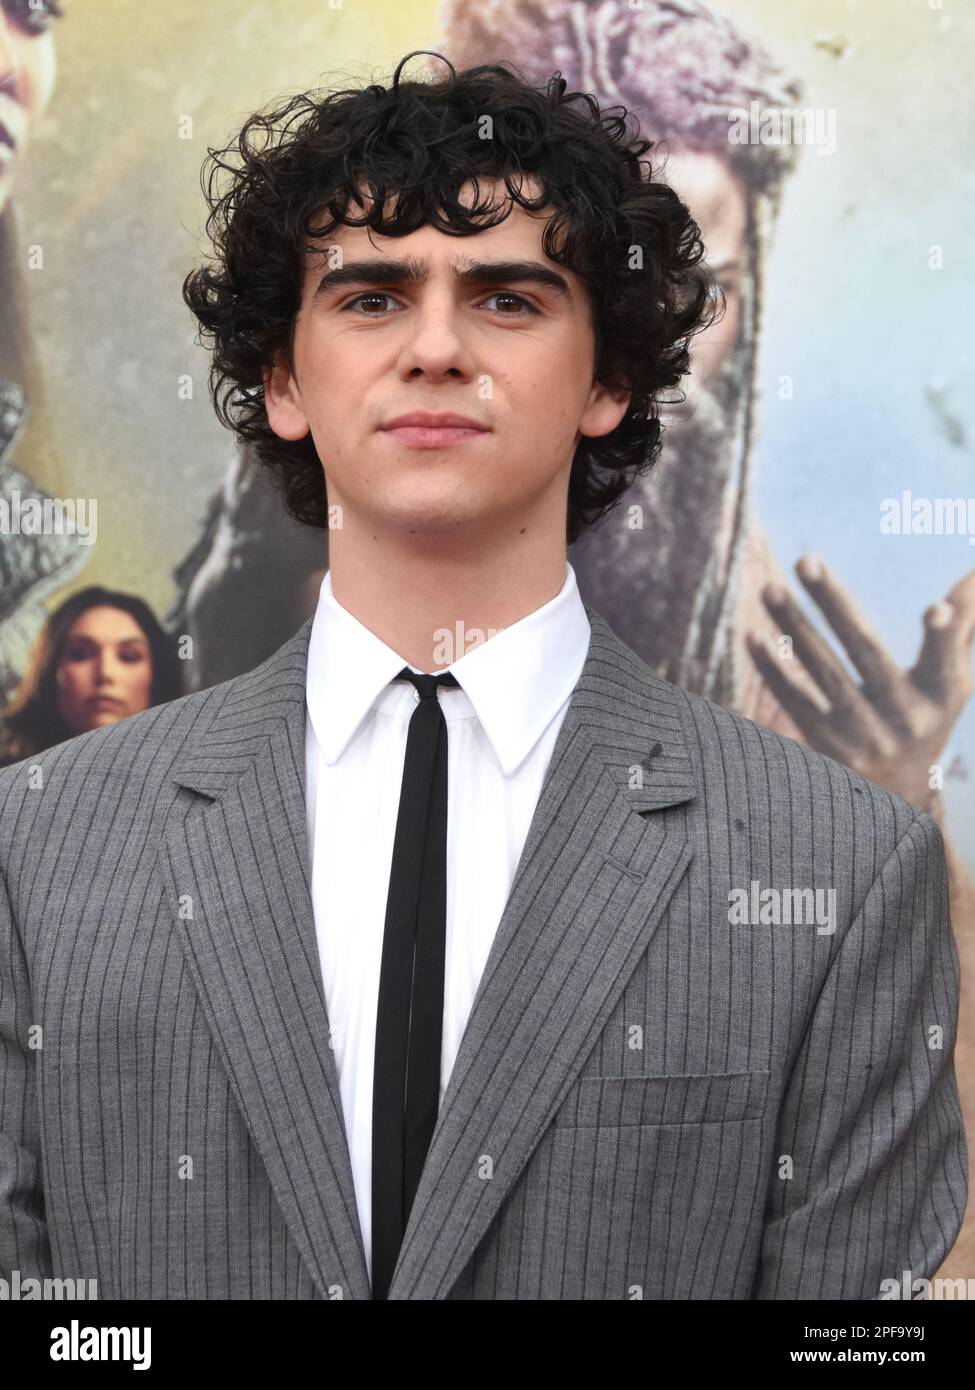 Los Angeles, California, USA 14th March 2023 Actor Jack Dylan Grazer attends the Premiere of Warner Bros. 'Shazam! Fury of the Gods' at Regency Village Theatre on March 14, 2023 in Los Angeles, California, USA. Photo by Barry King/Alamy Stock Photo Stock Photo